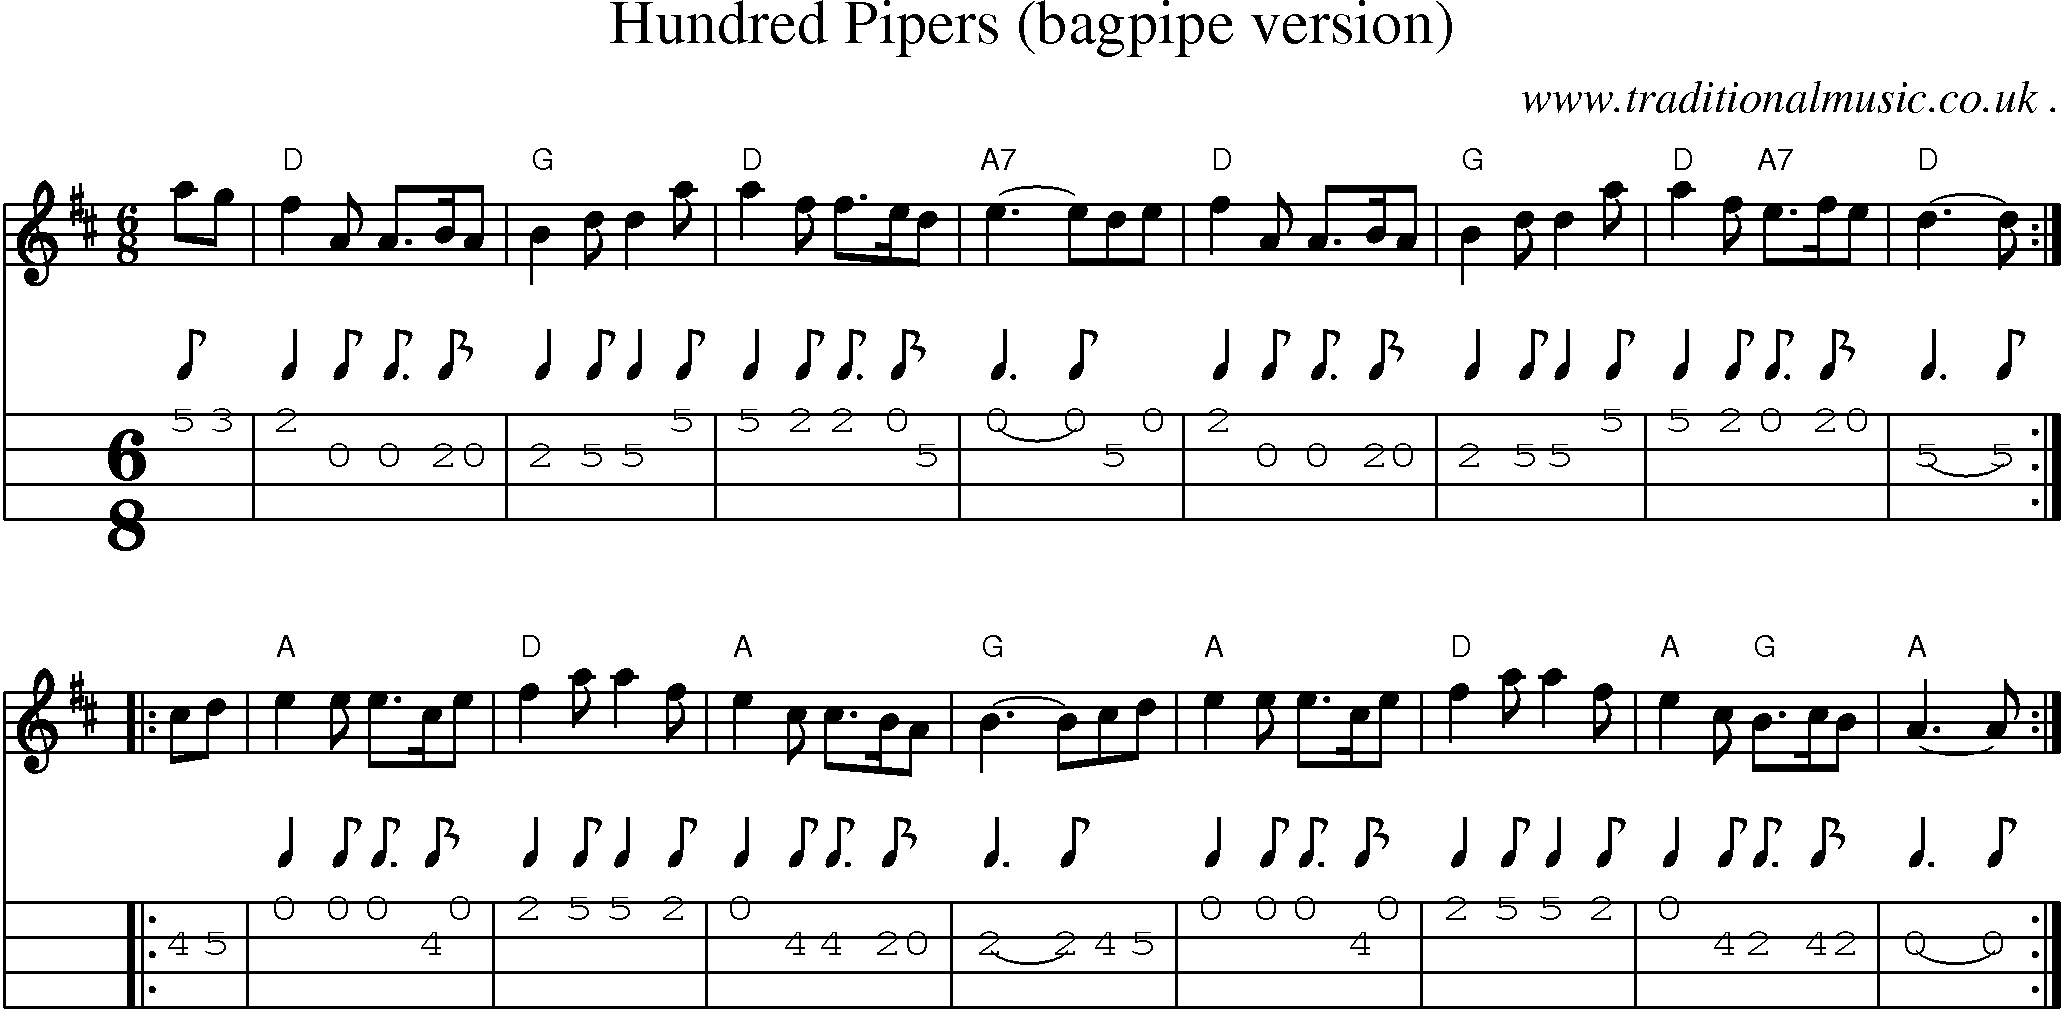 Sheet-music  score, Chords and Mandolin Tabs for Hundred Pipers Bagpipe Version